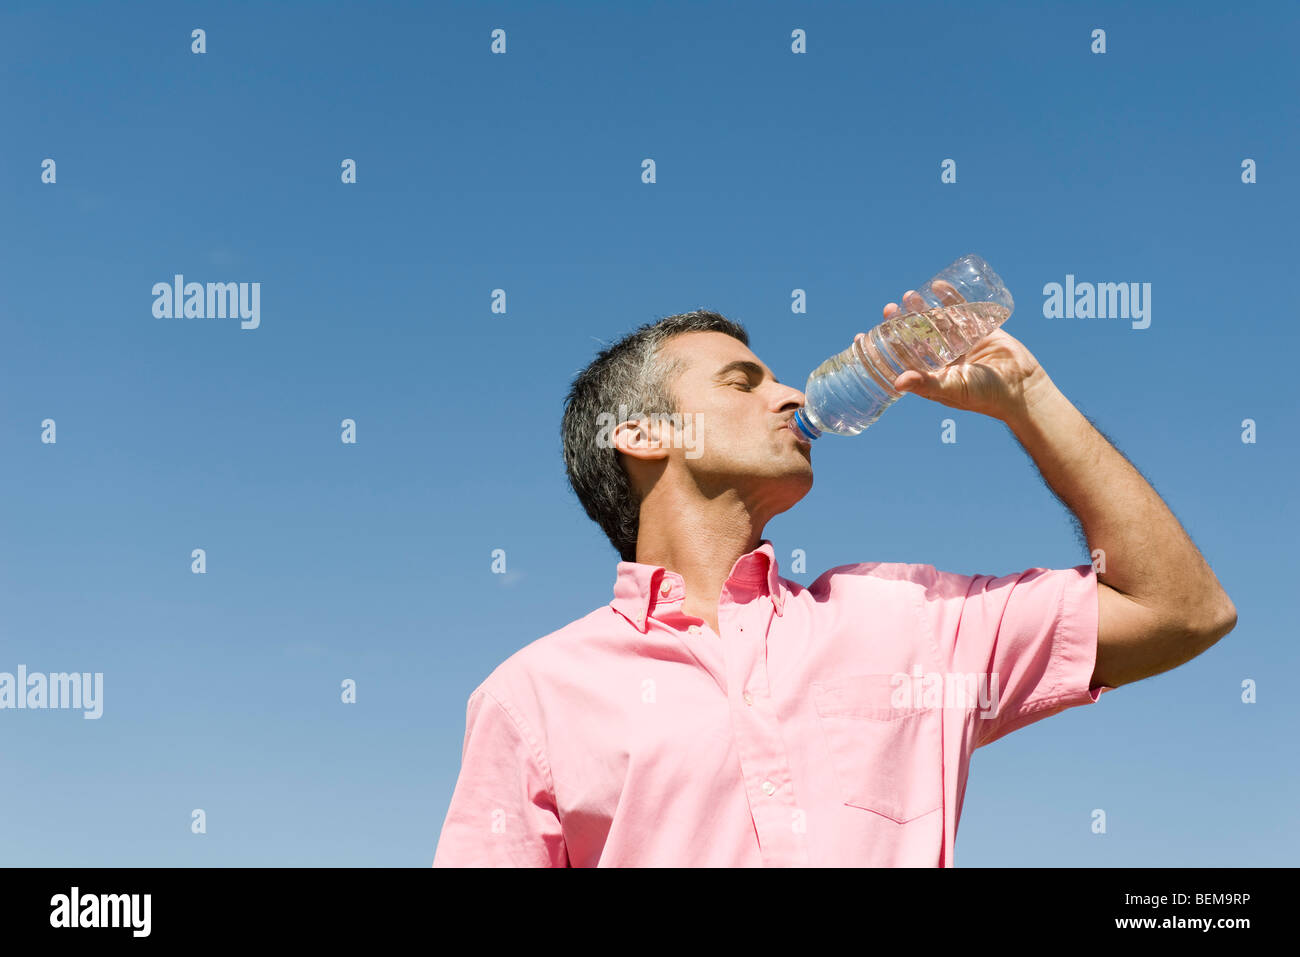 Man standing outdoors drinking from bottle of water, low angle view, blue sky in background Stock Photo